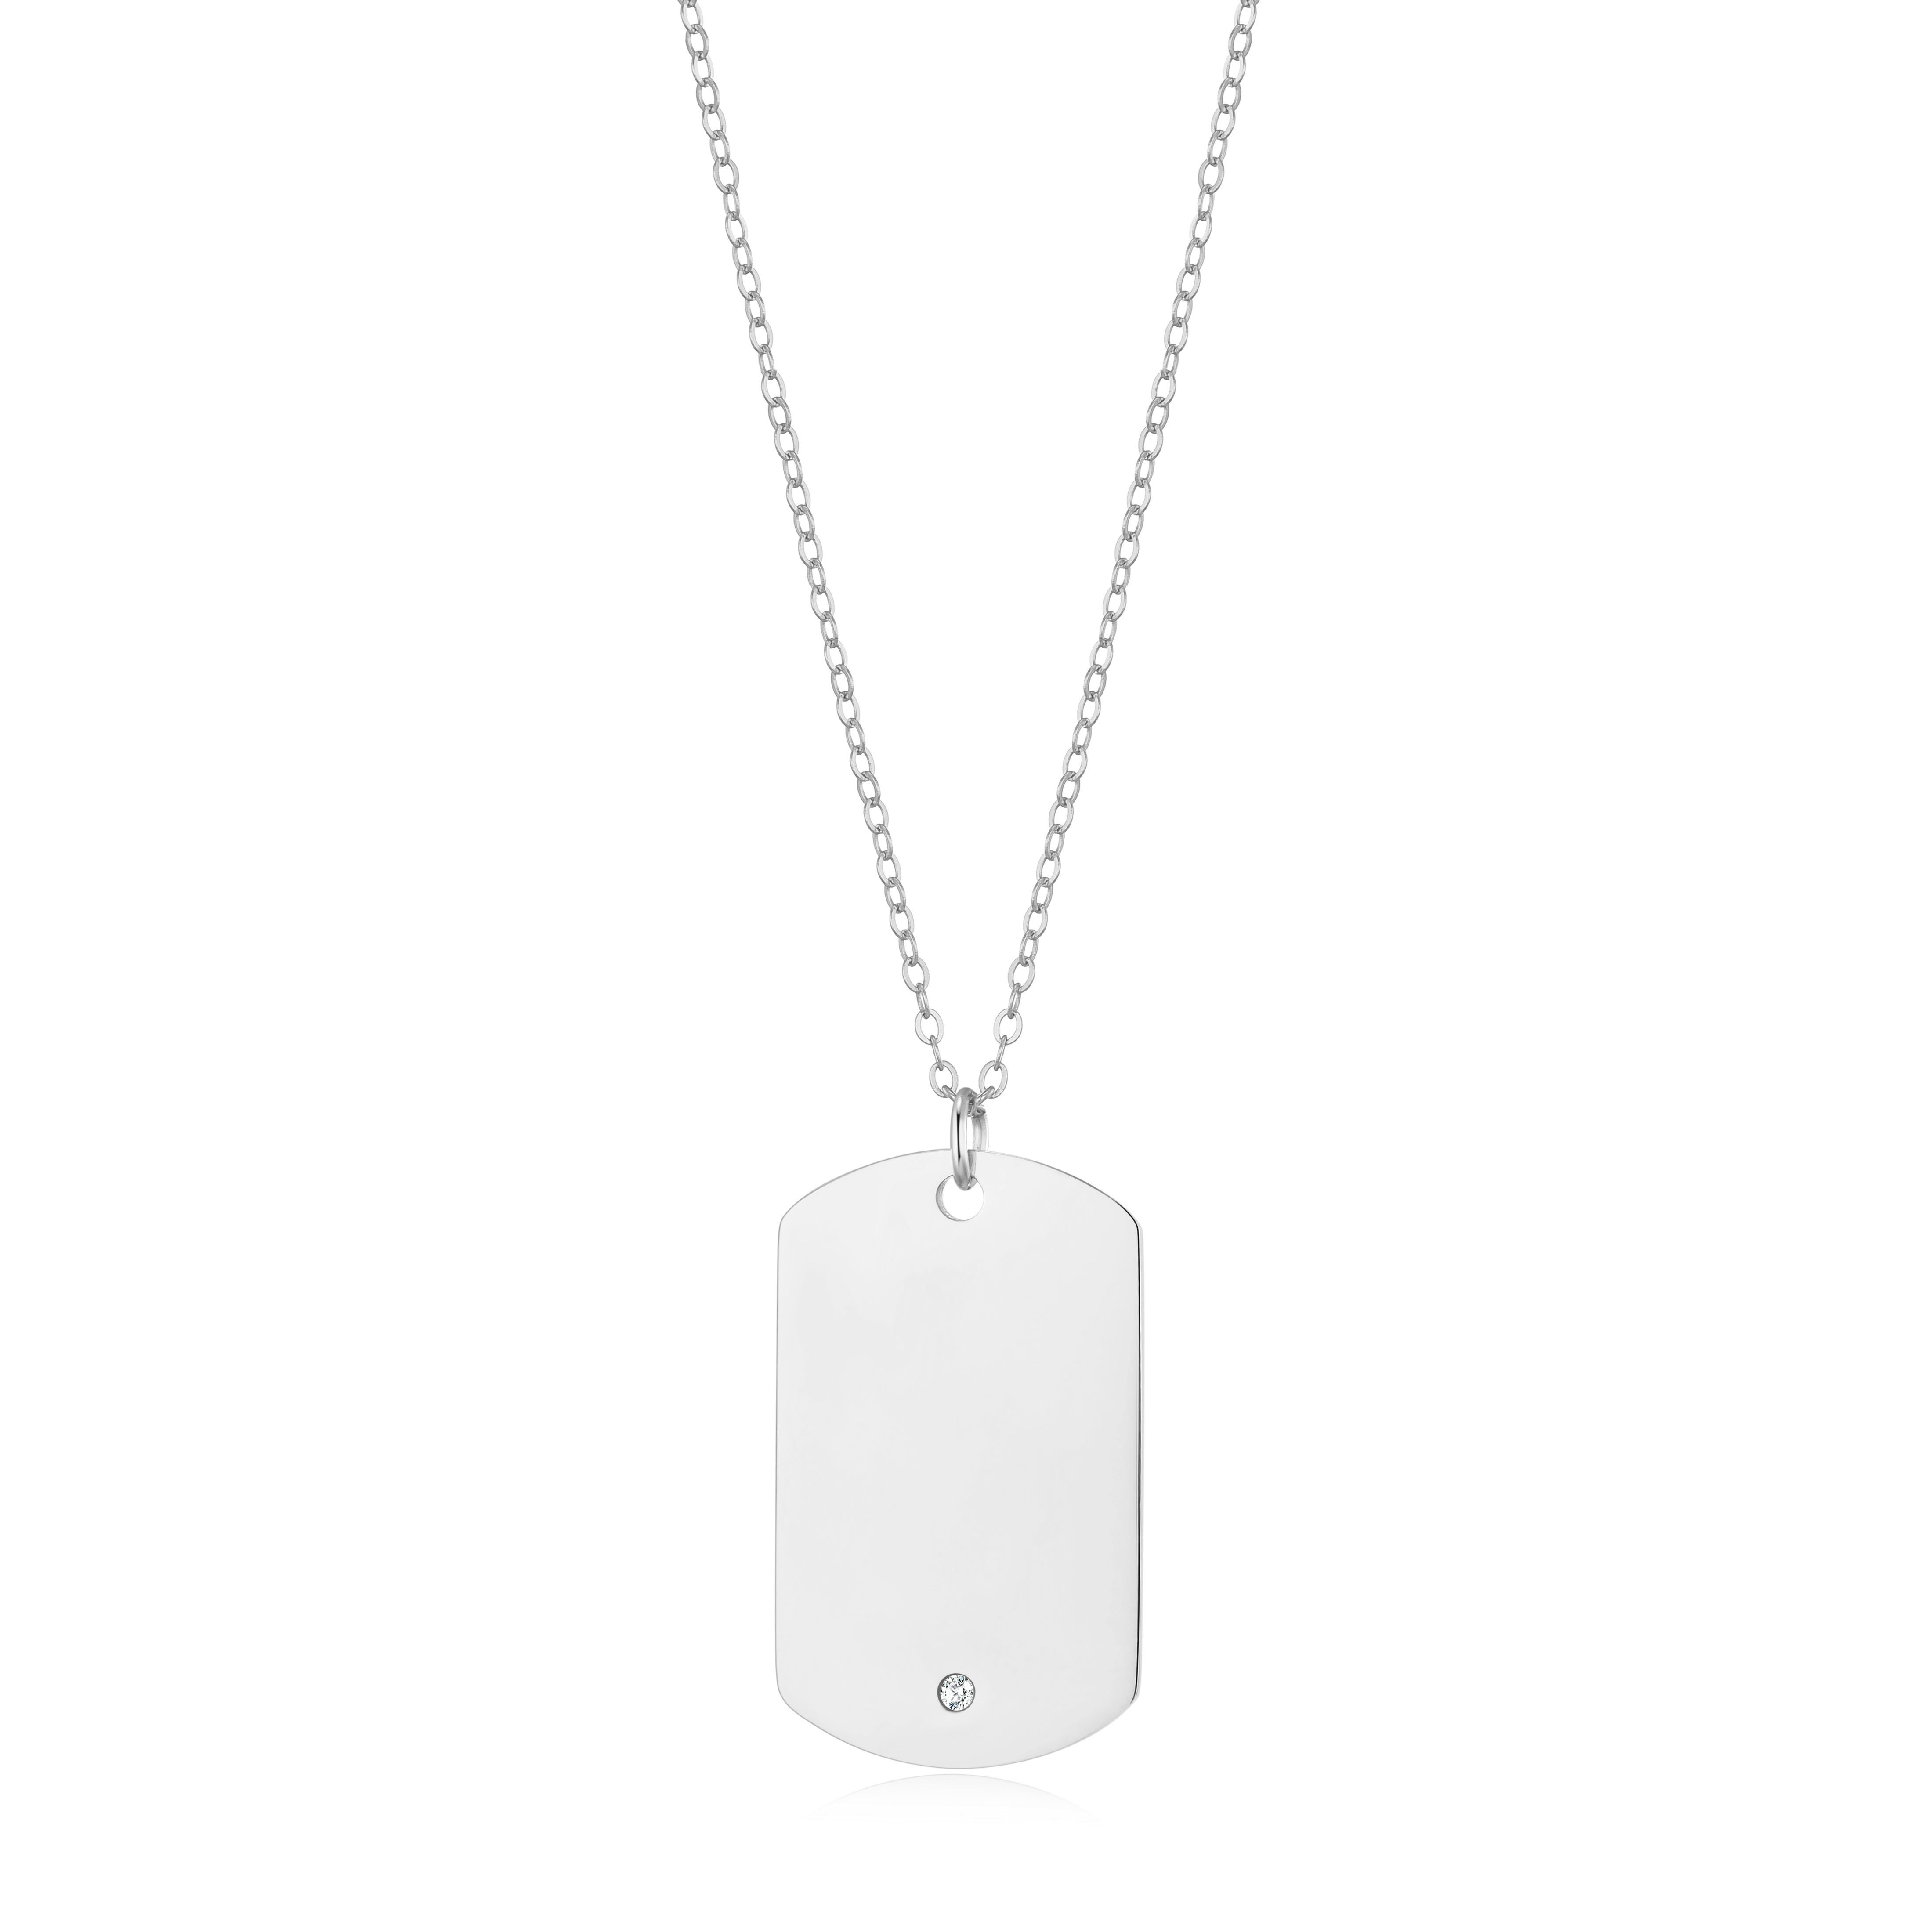 Men's Stainless Steel Dog Tag Necklace Created with Zircondia® Crystals by Philip Jones Jewellery